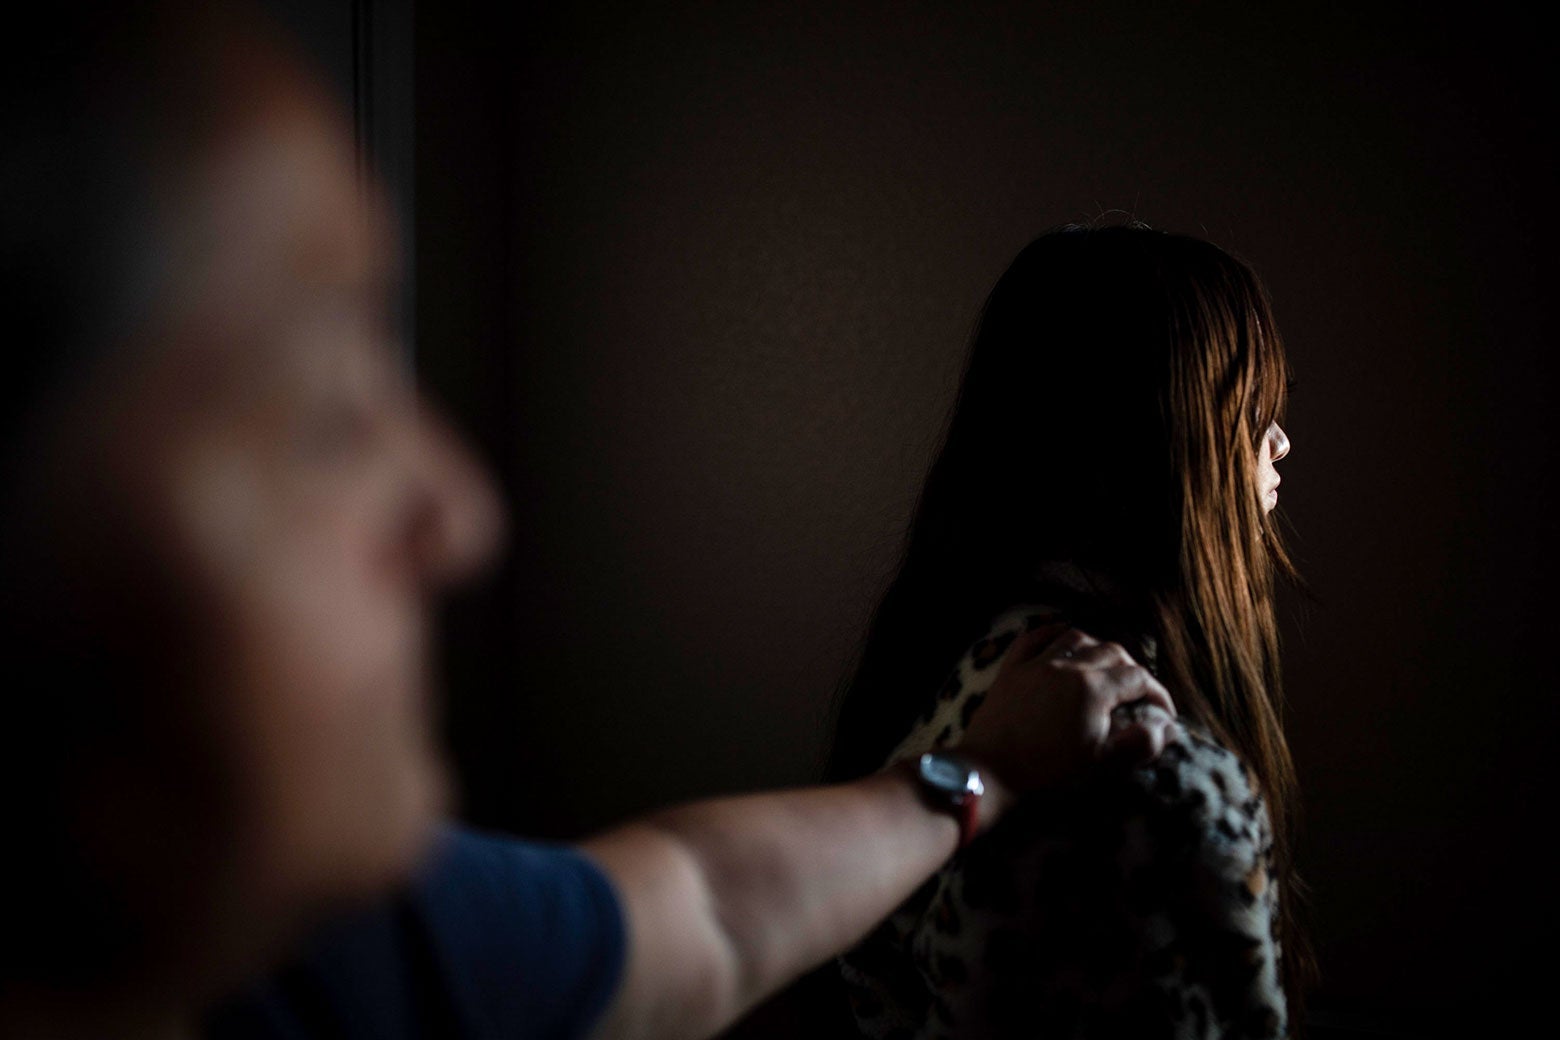 One Navajo girls story shows Americas failure to screen for sex trafficking. picture